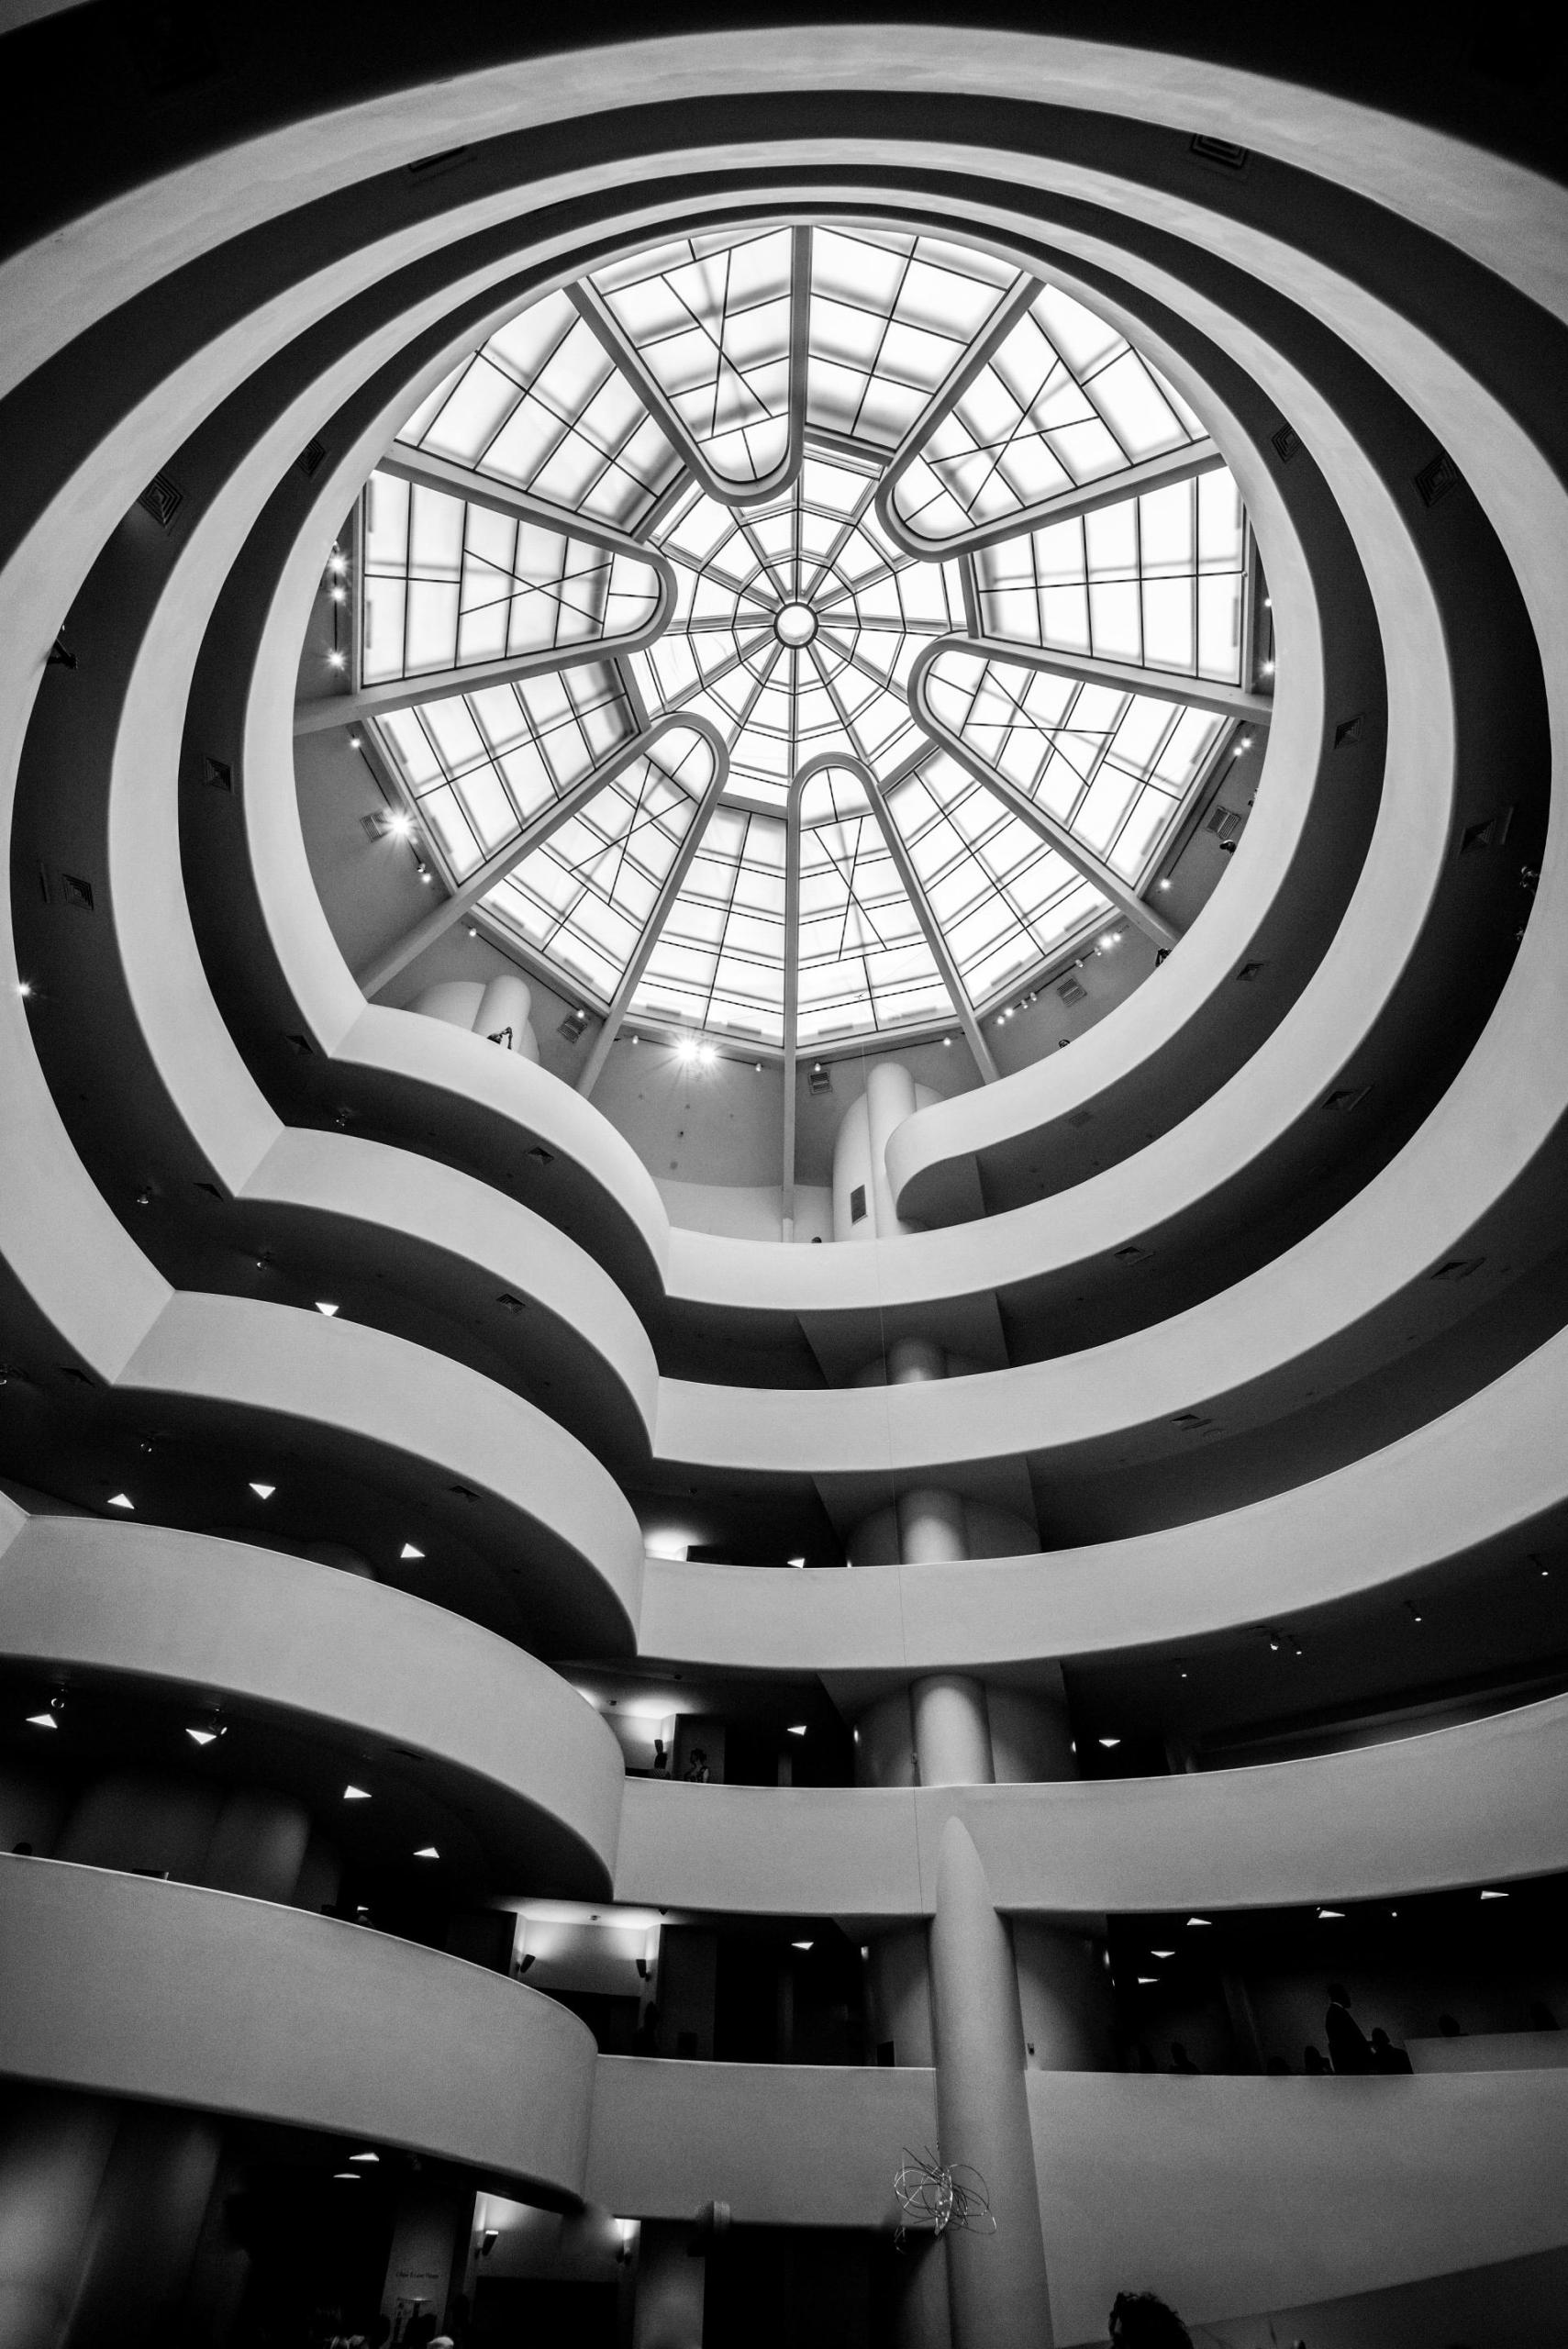 Atrium and stairs at famous Guggenheim museum in New York